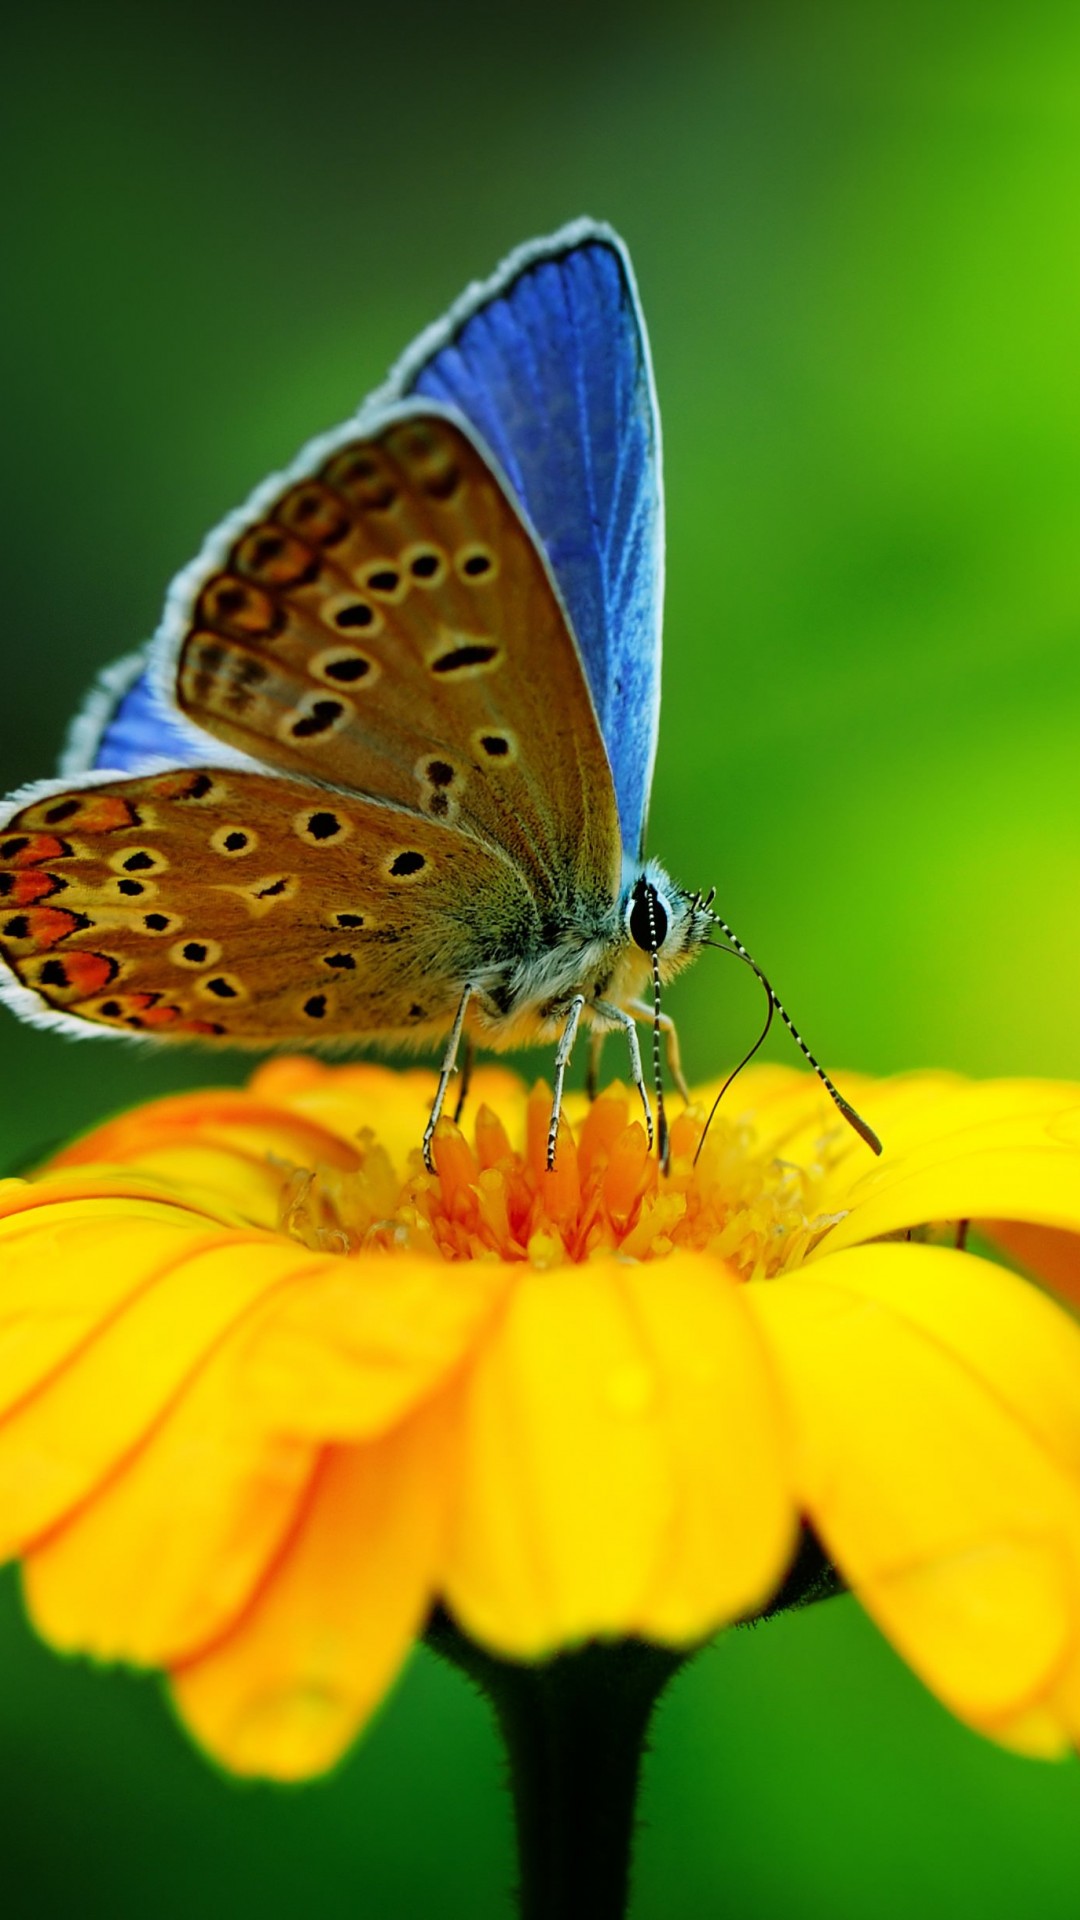 Butterfly Collecting Pollen Wallpaper for SONY Xperia Z1